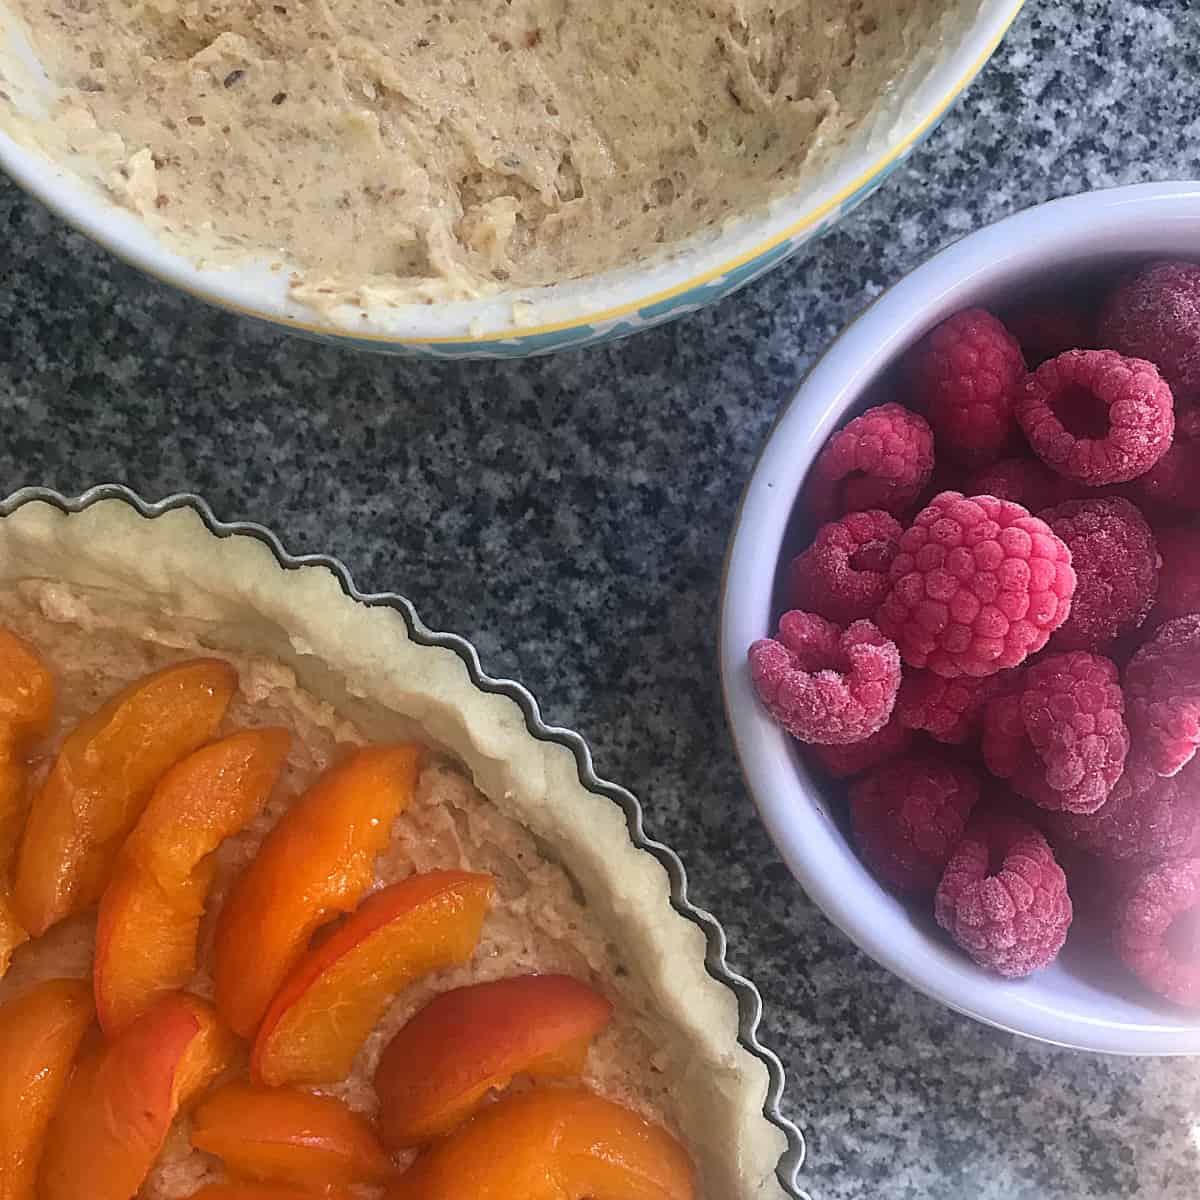 Partial view of crust with apricots, bowl with frangipane, raspberries in bowl